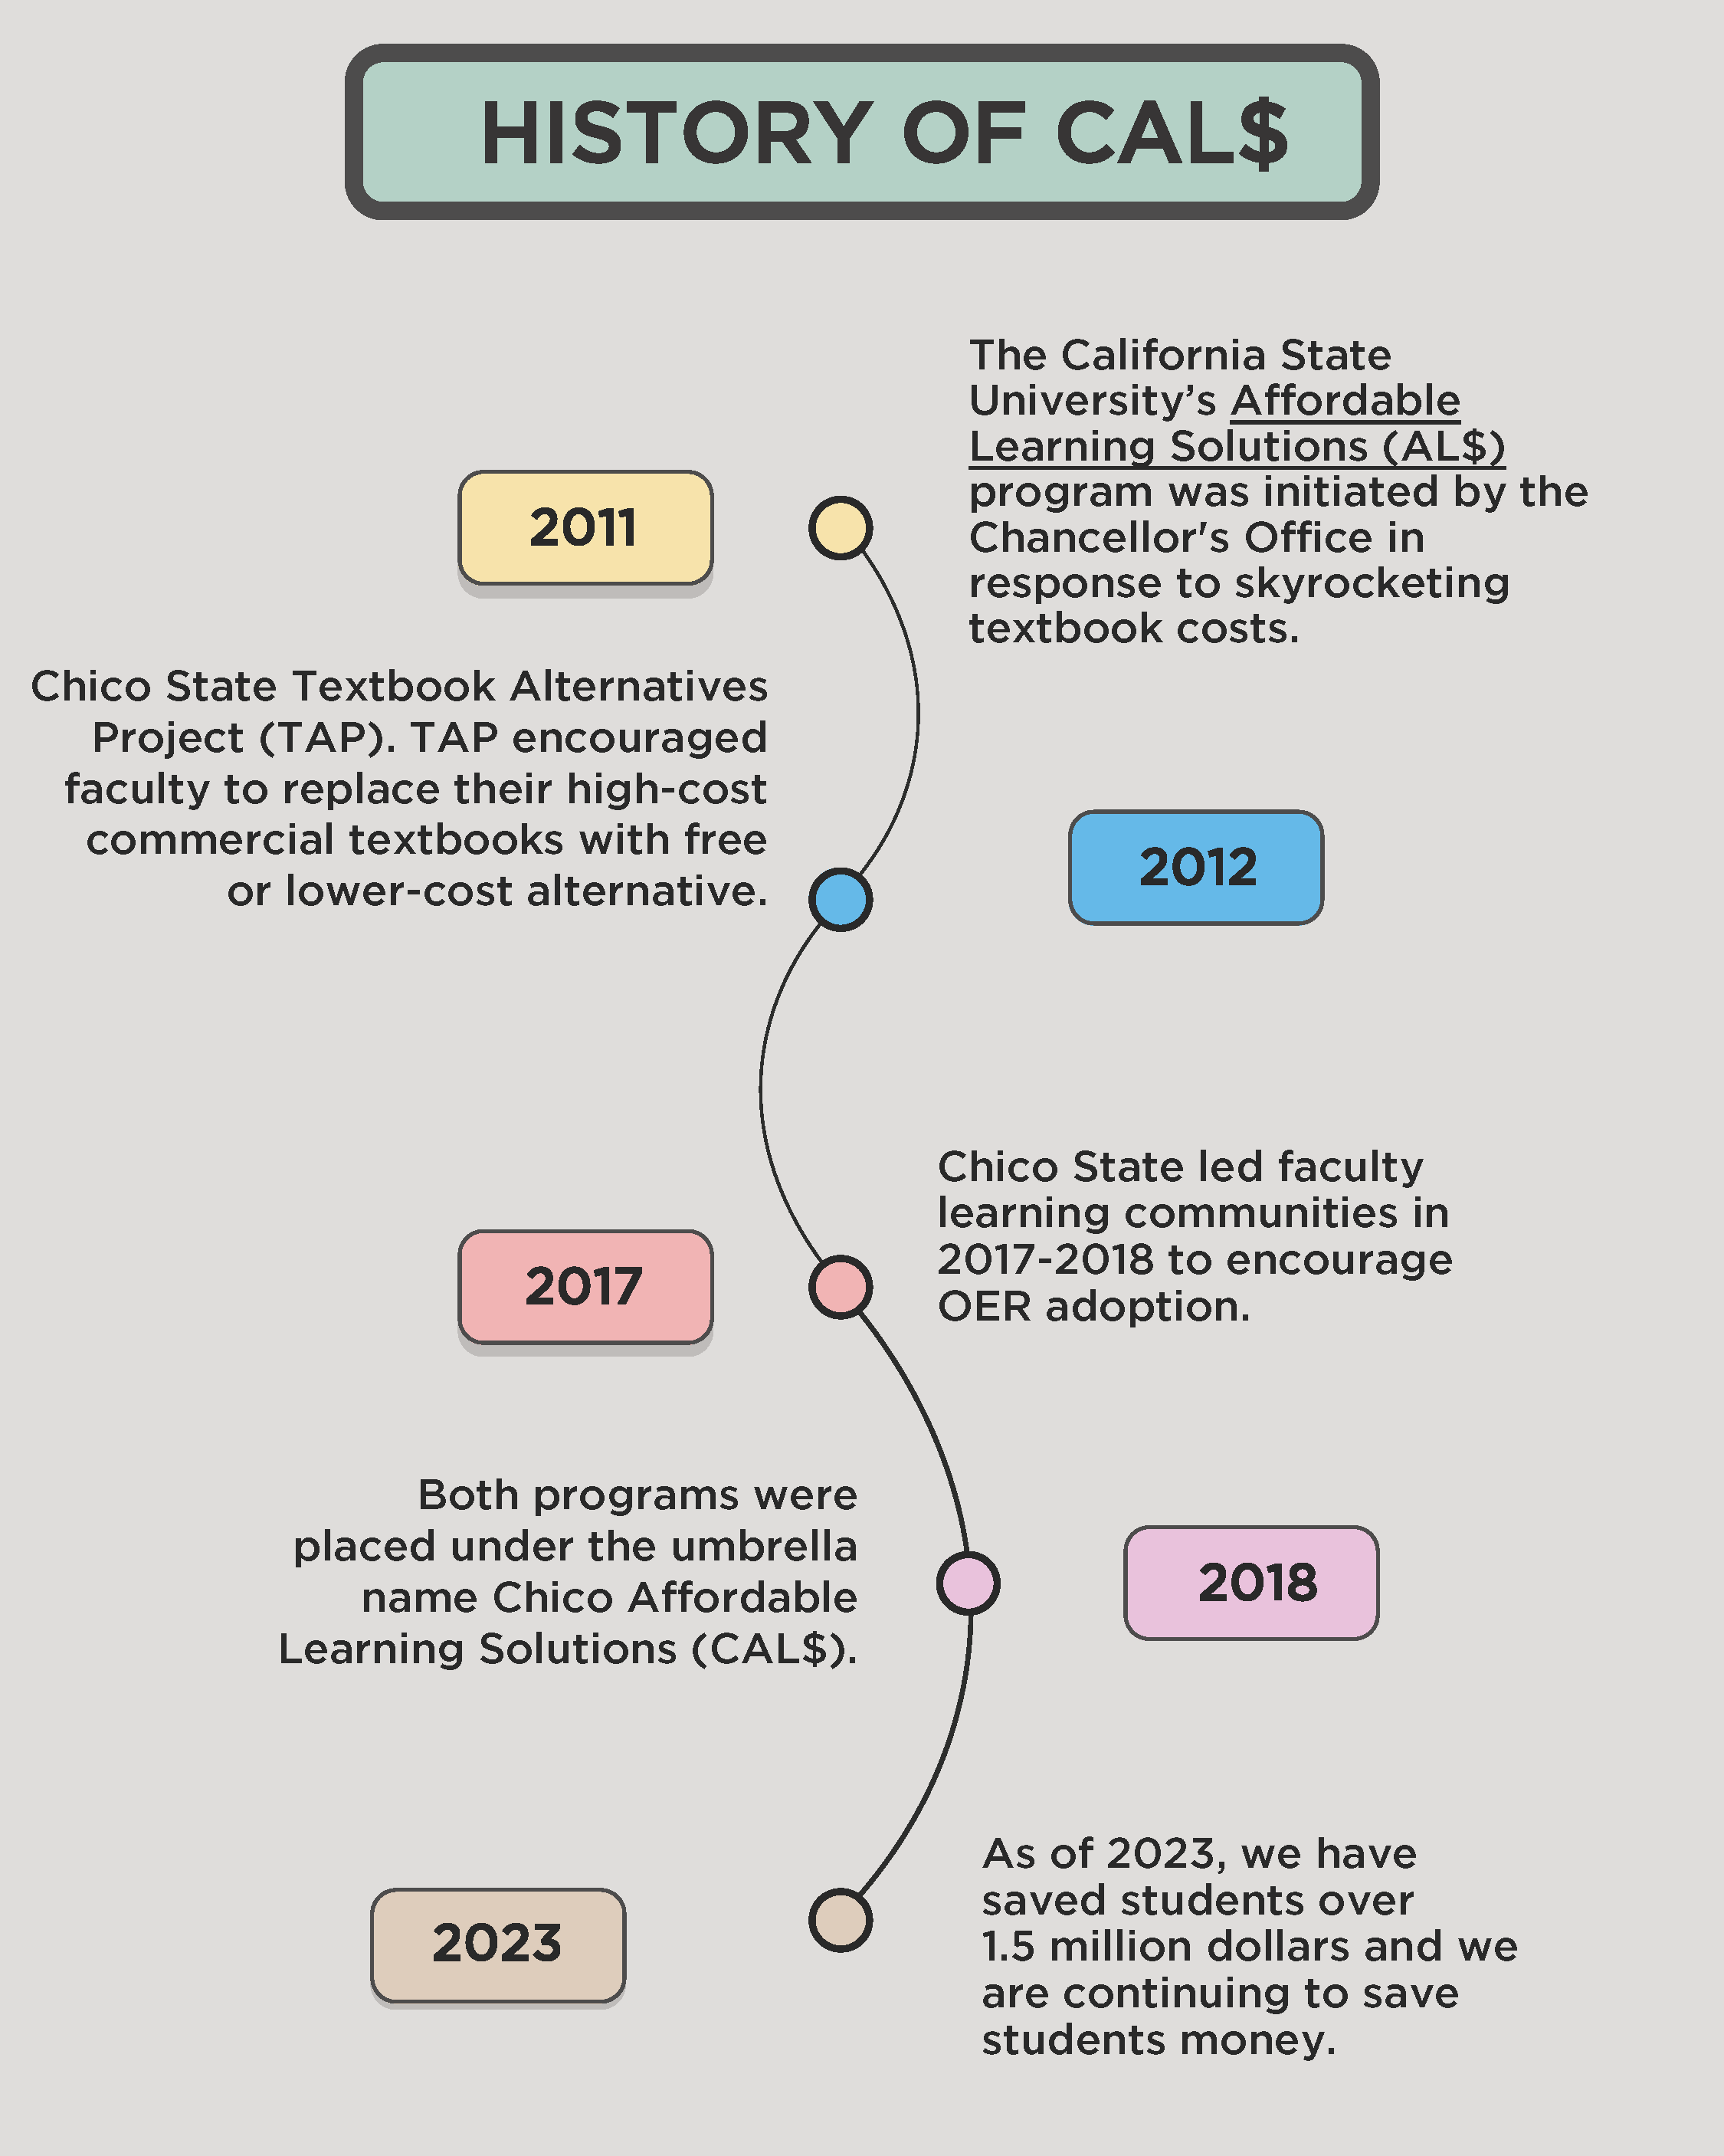 Historical Timeline of CAL$ from 2011 to 2023